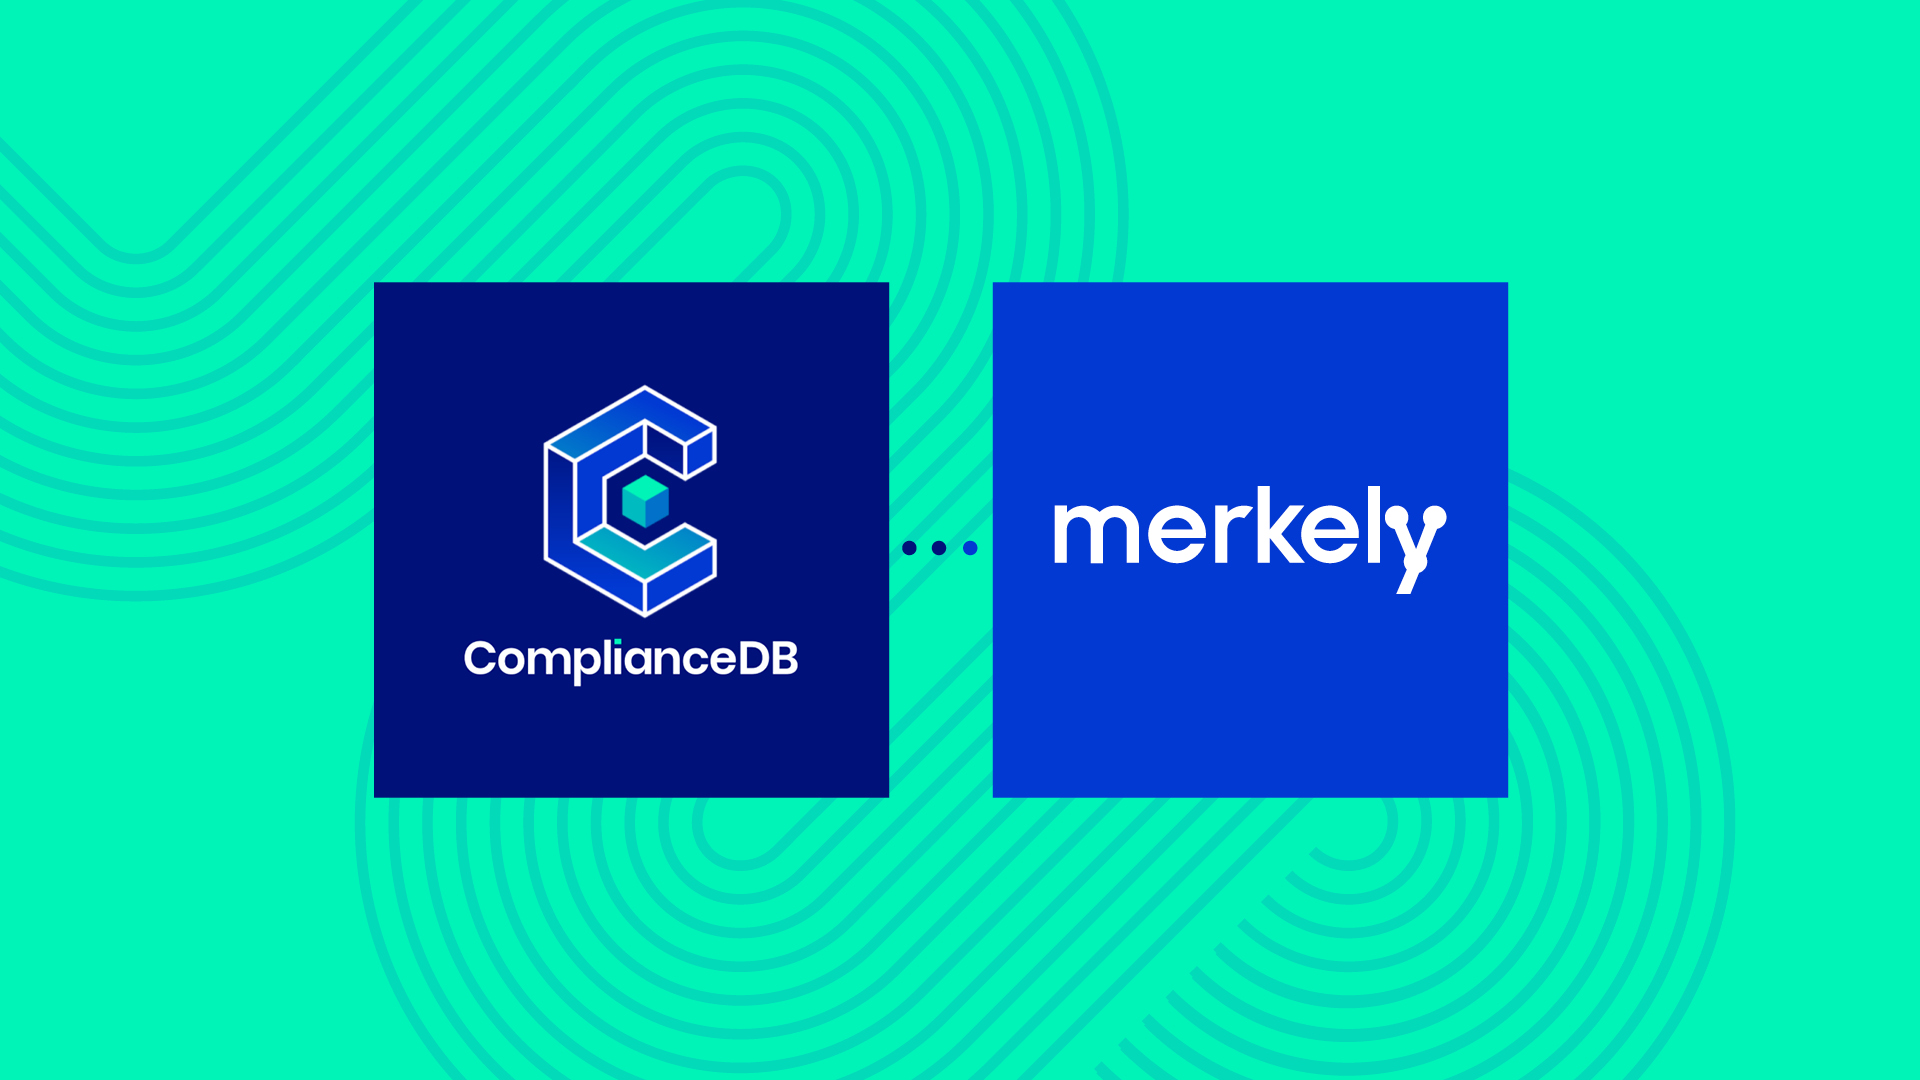 The old ComplianceDB logo and name chnaged to Merkely in 2021